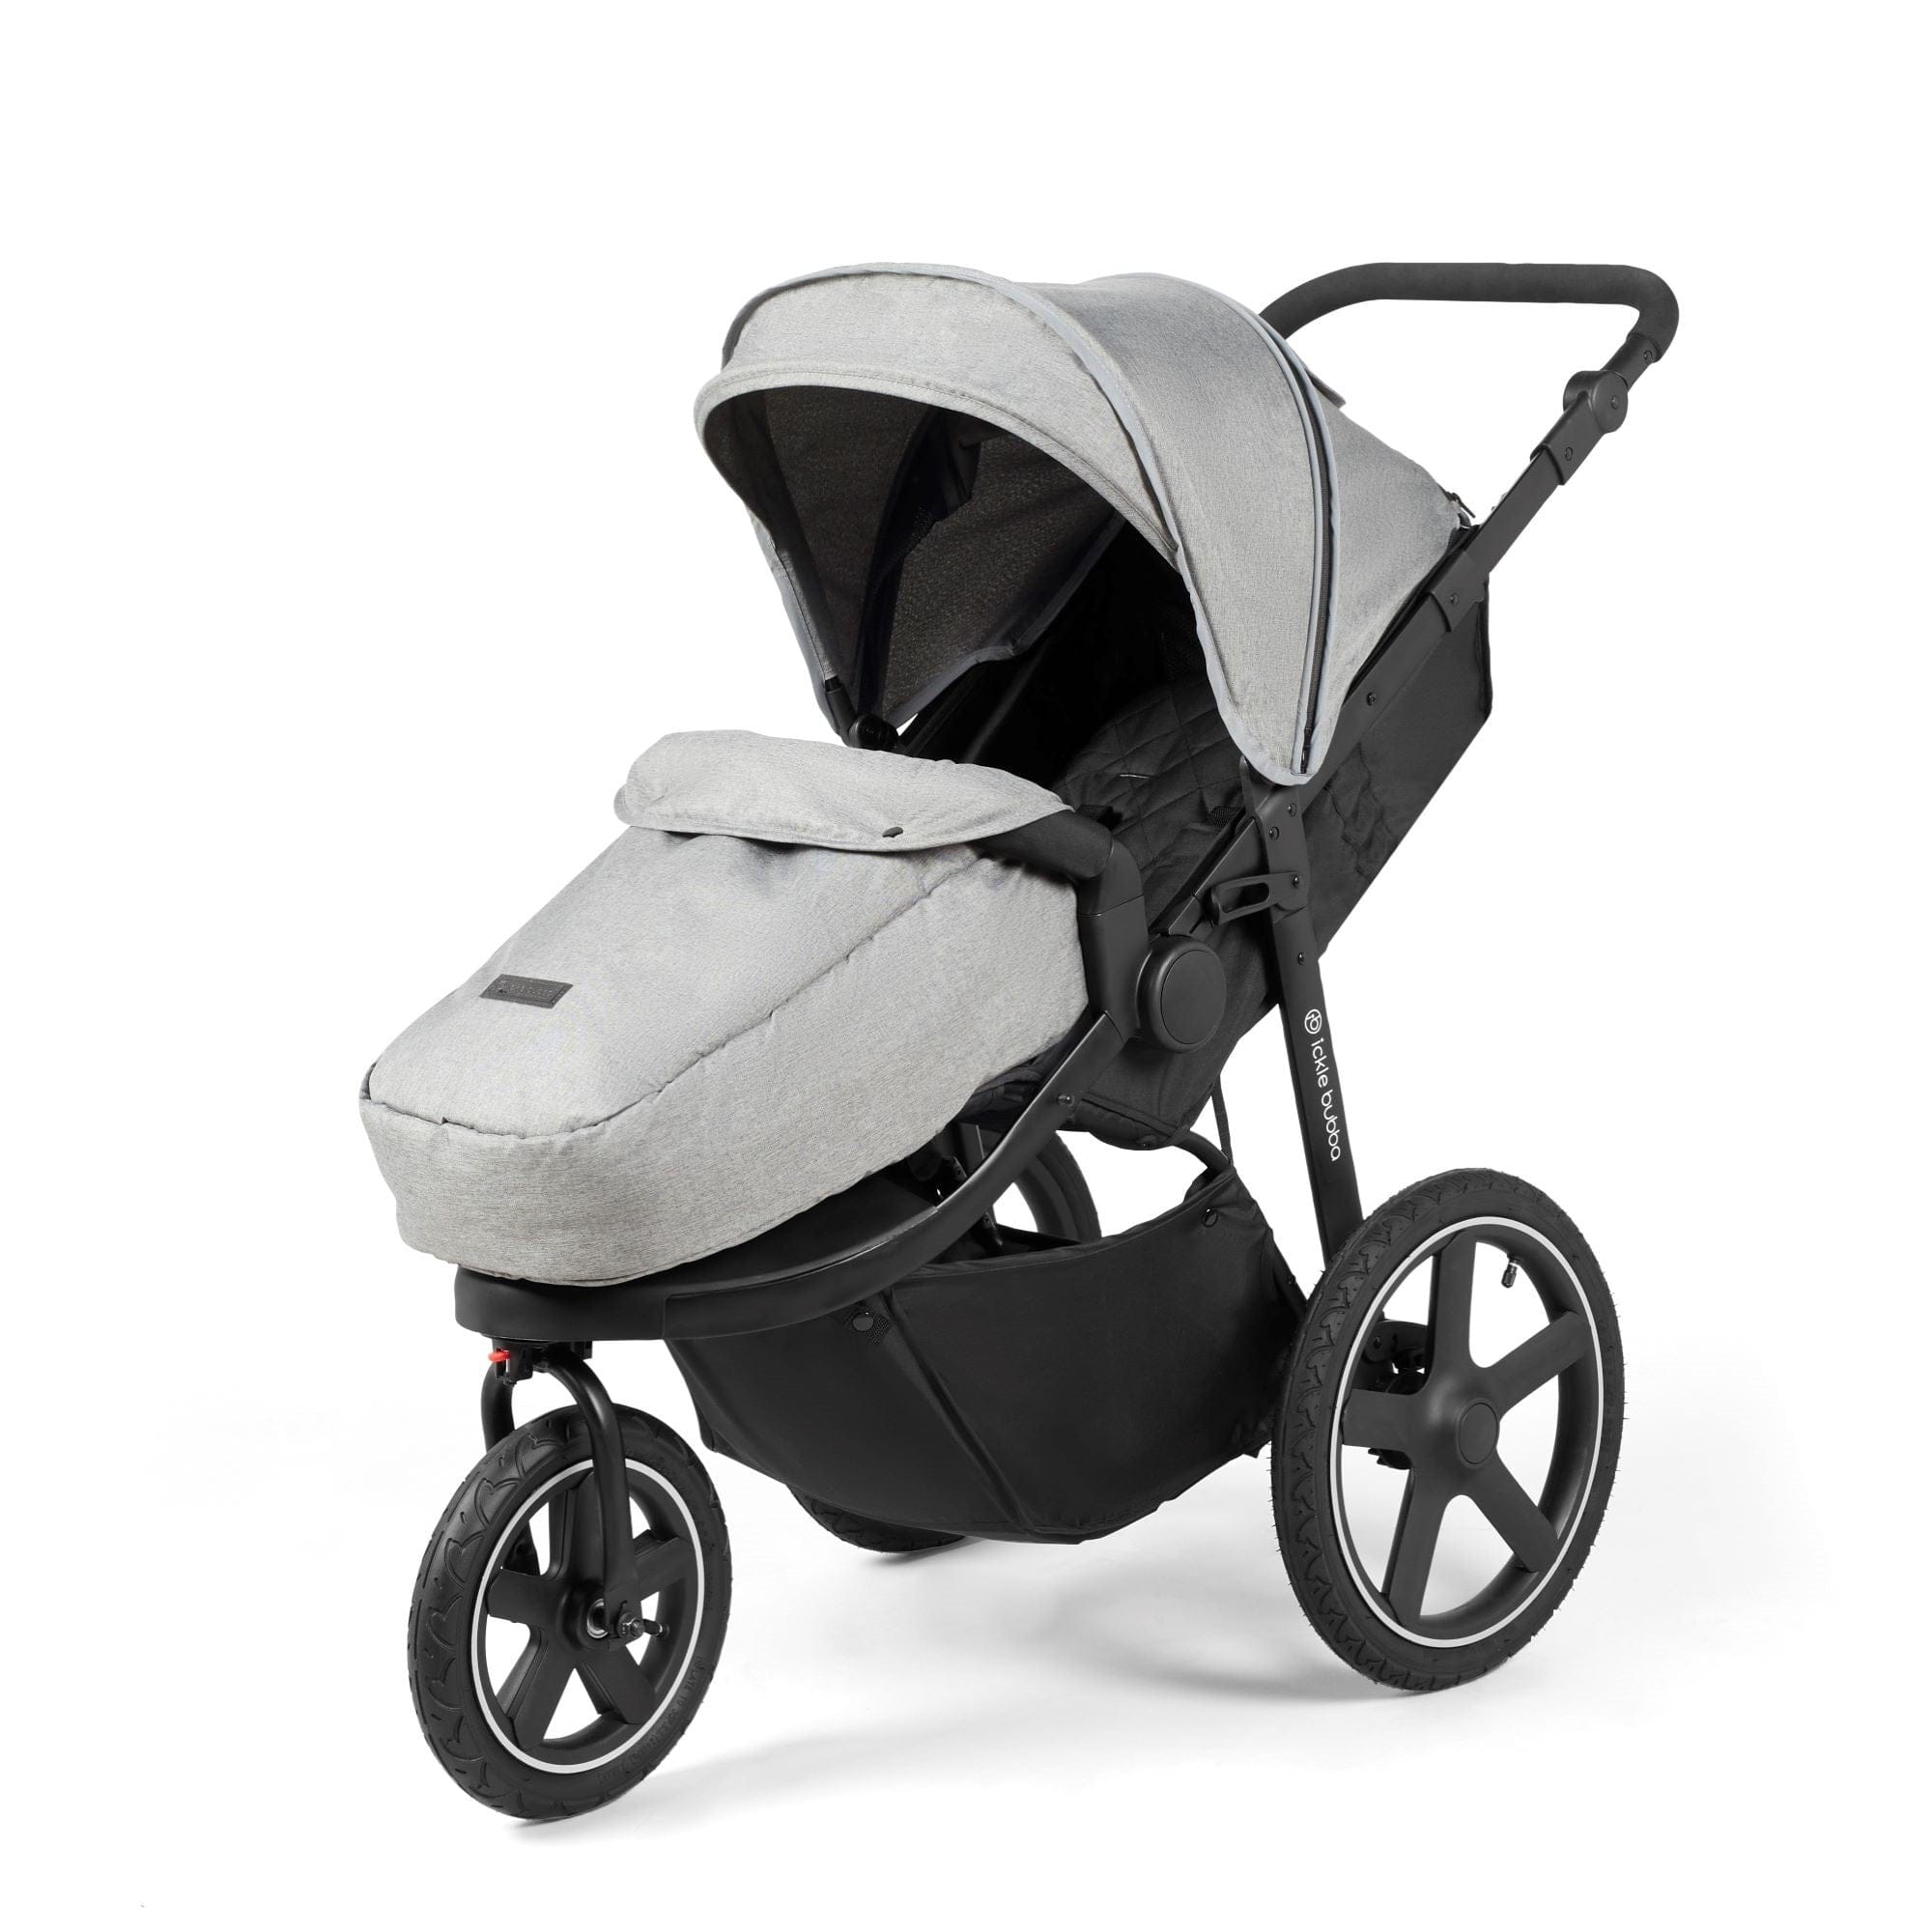 Ickle Bubba Venus Max Jogger Stroller I-Size Travel System in Black/Space Grey with Isofix Base 3 Wheelers 13-004-500-014 5060777950422